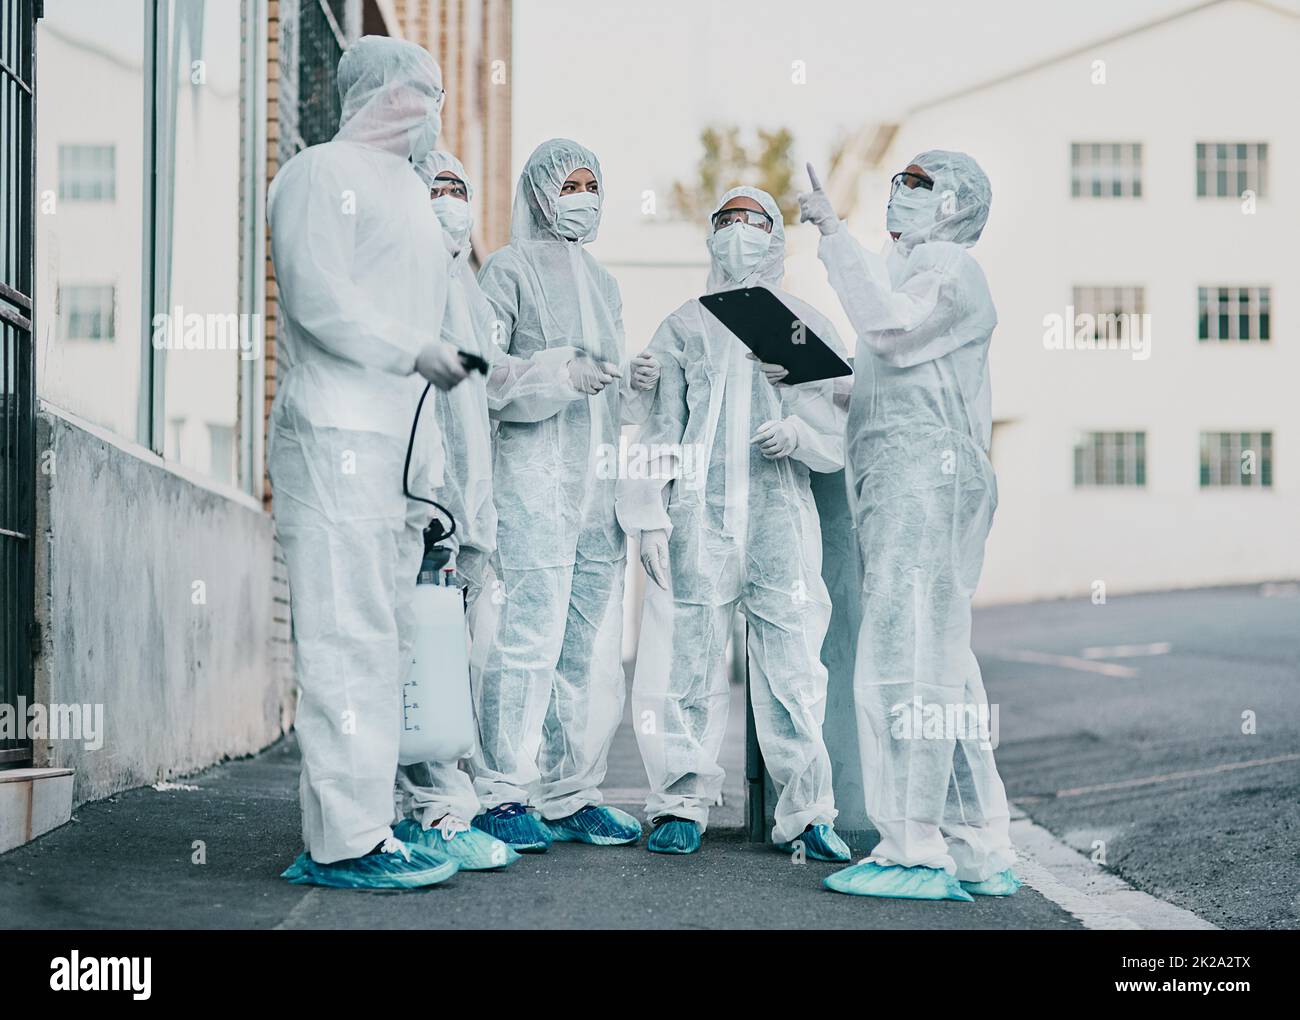 Healthcare workers are the heroes of this story. Shot of a group of healthcare workers wearing hazmat suits working together during an outbreak in the city. Stock Photo